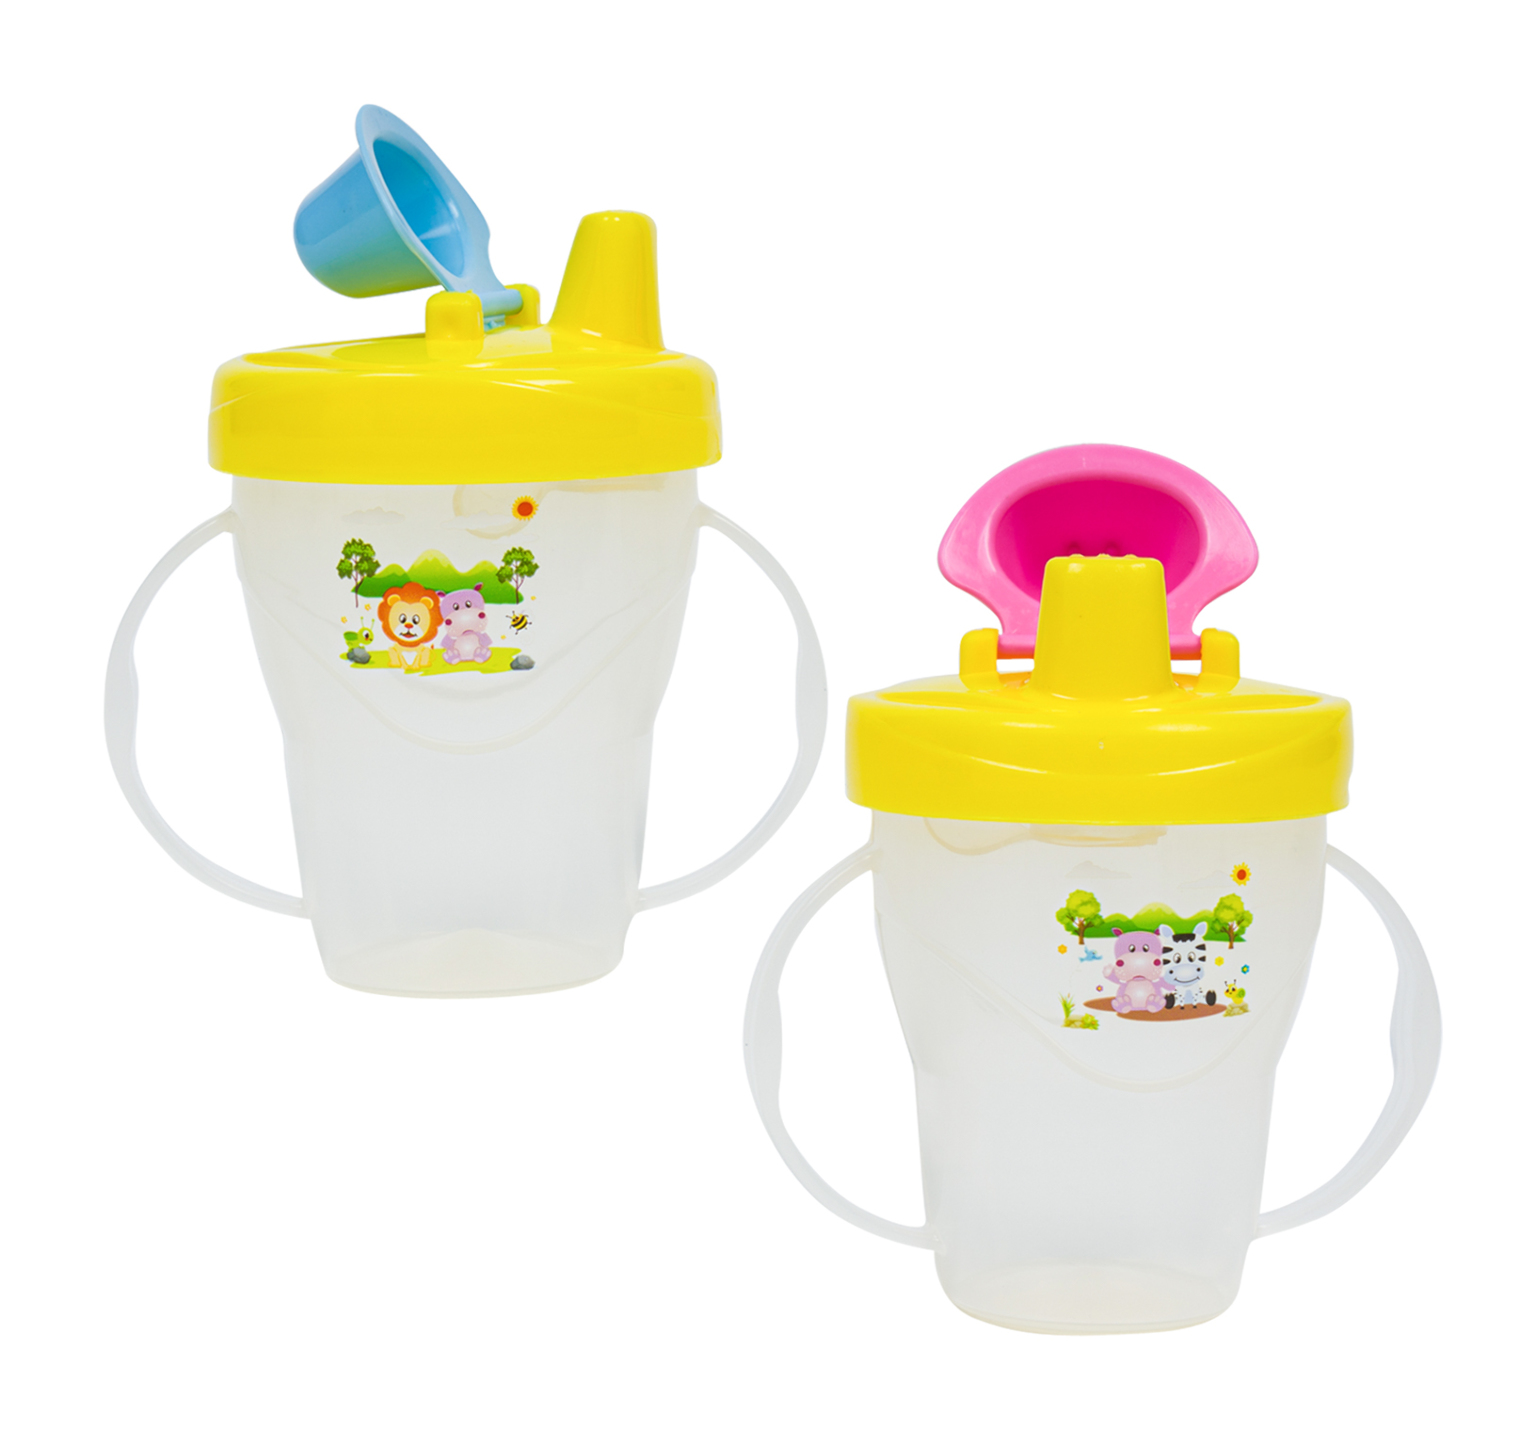 Wholesale Fisher Price Sippy Straw Cup W/ Handle MULTI COLOR